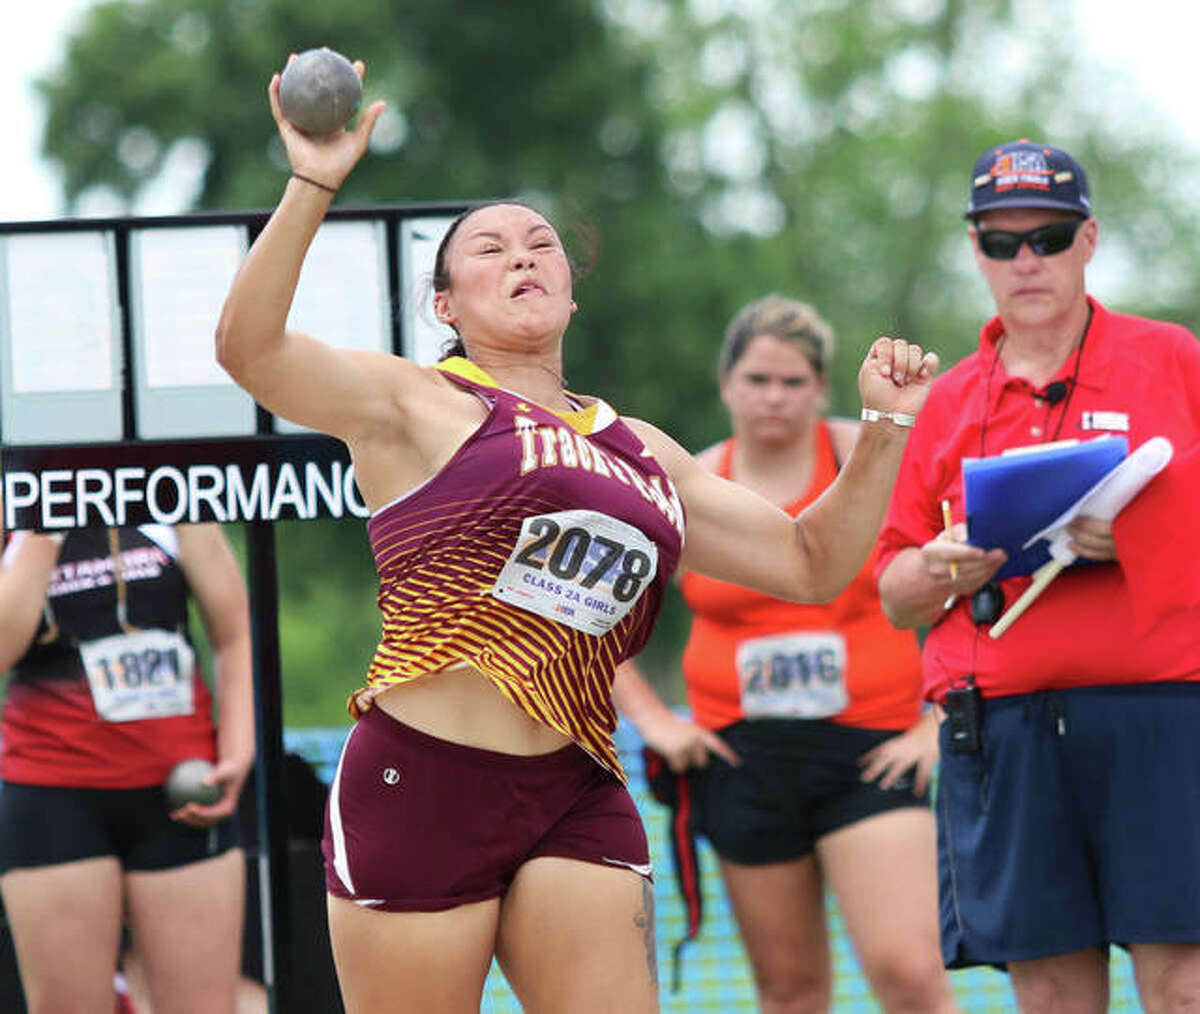 EA-WR senior Jayden Ulrich gets off her winning throw of 14.84 meters in her first attempt in the shot put at the Class 2A state meet Friday at O’Brien Stadium in Charleston. Ulrich won state championships in both the shot and discus.